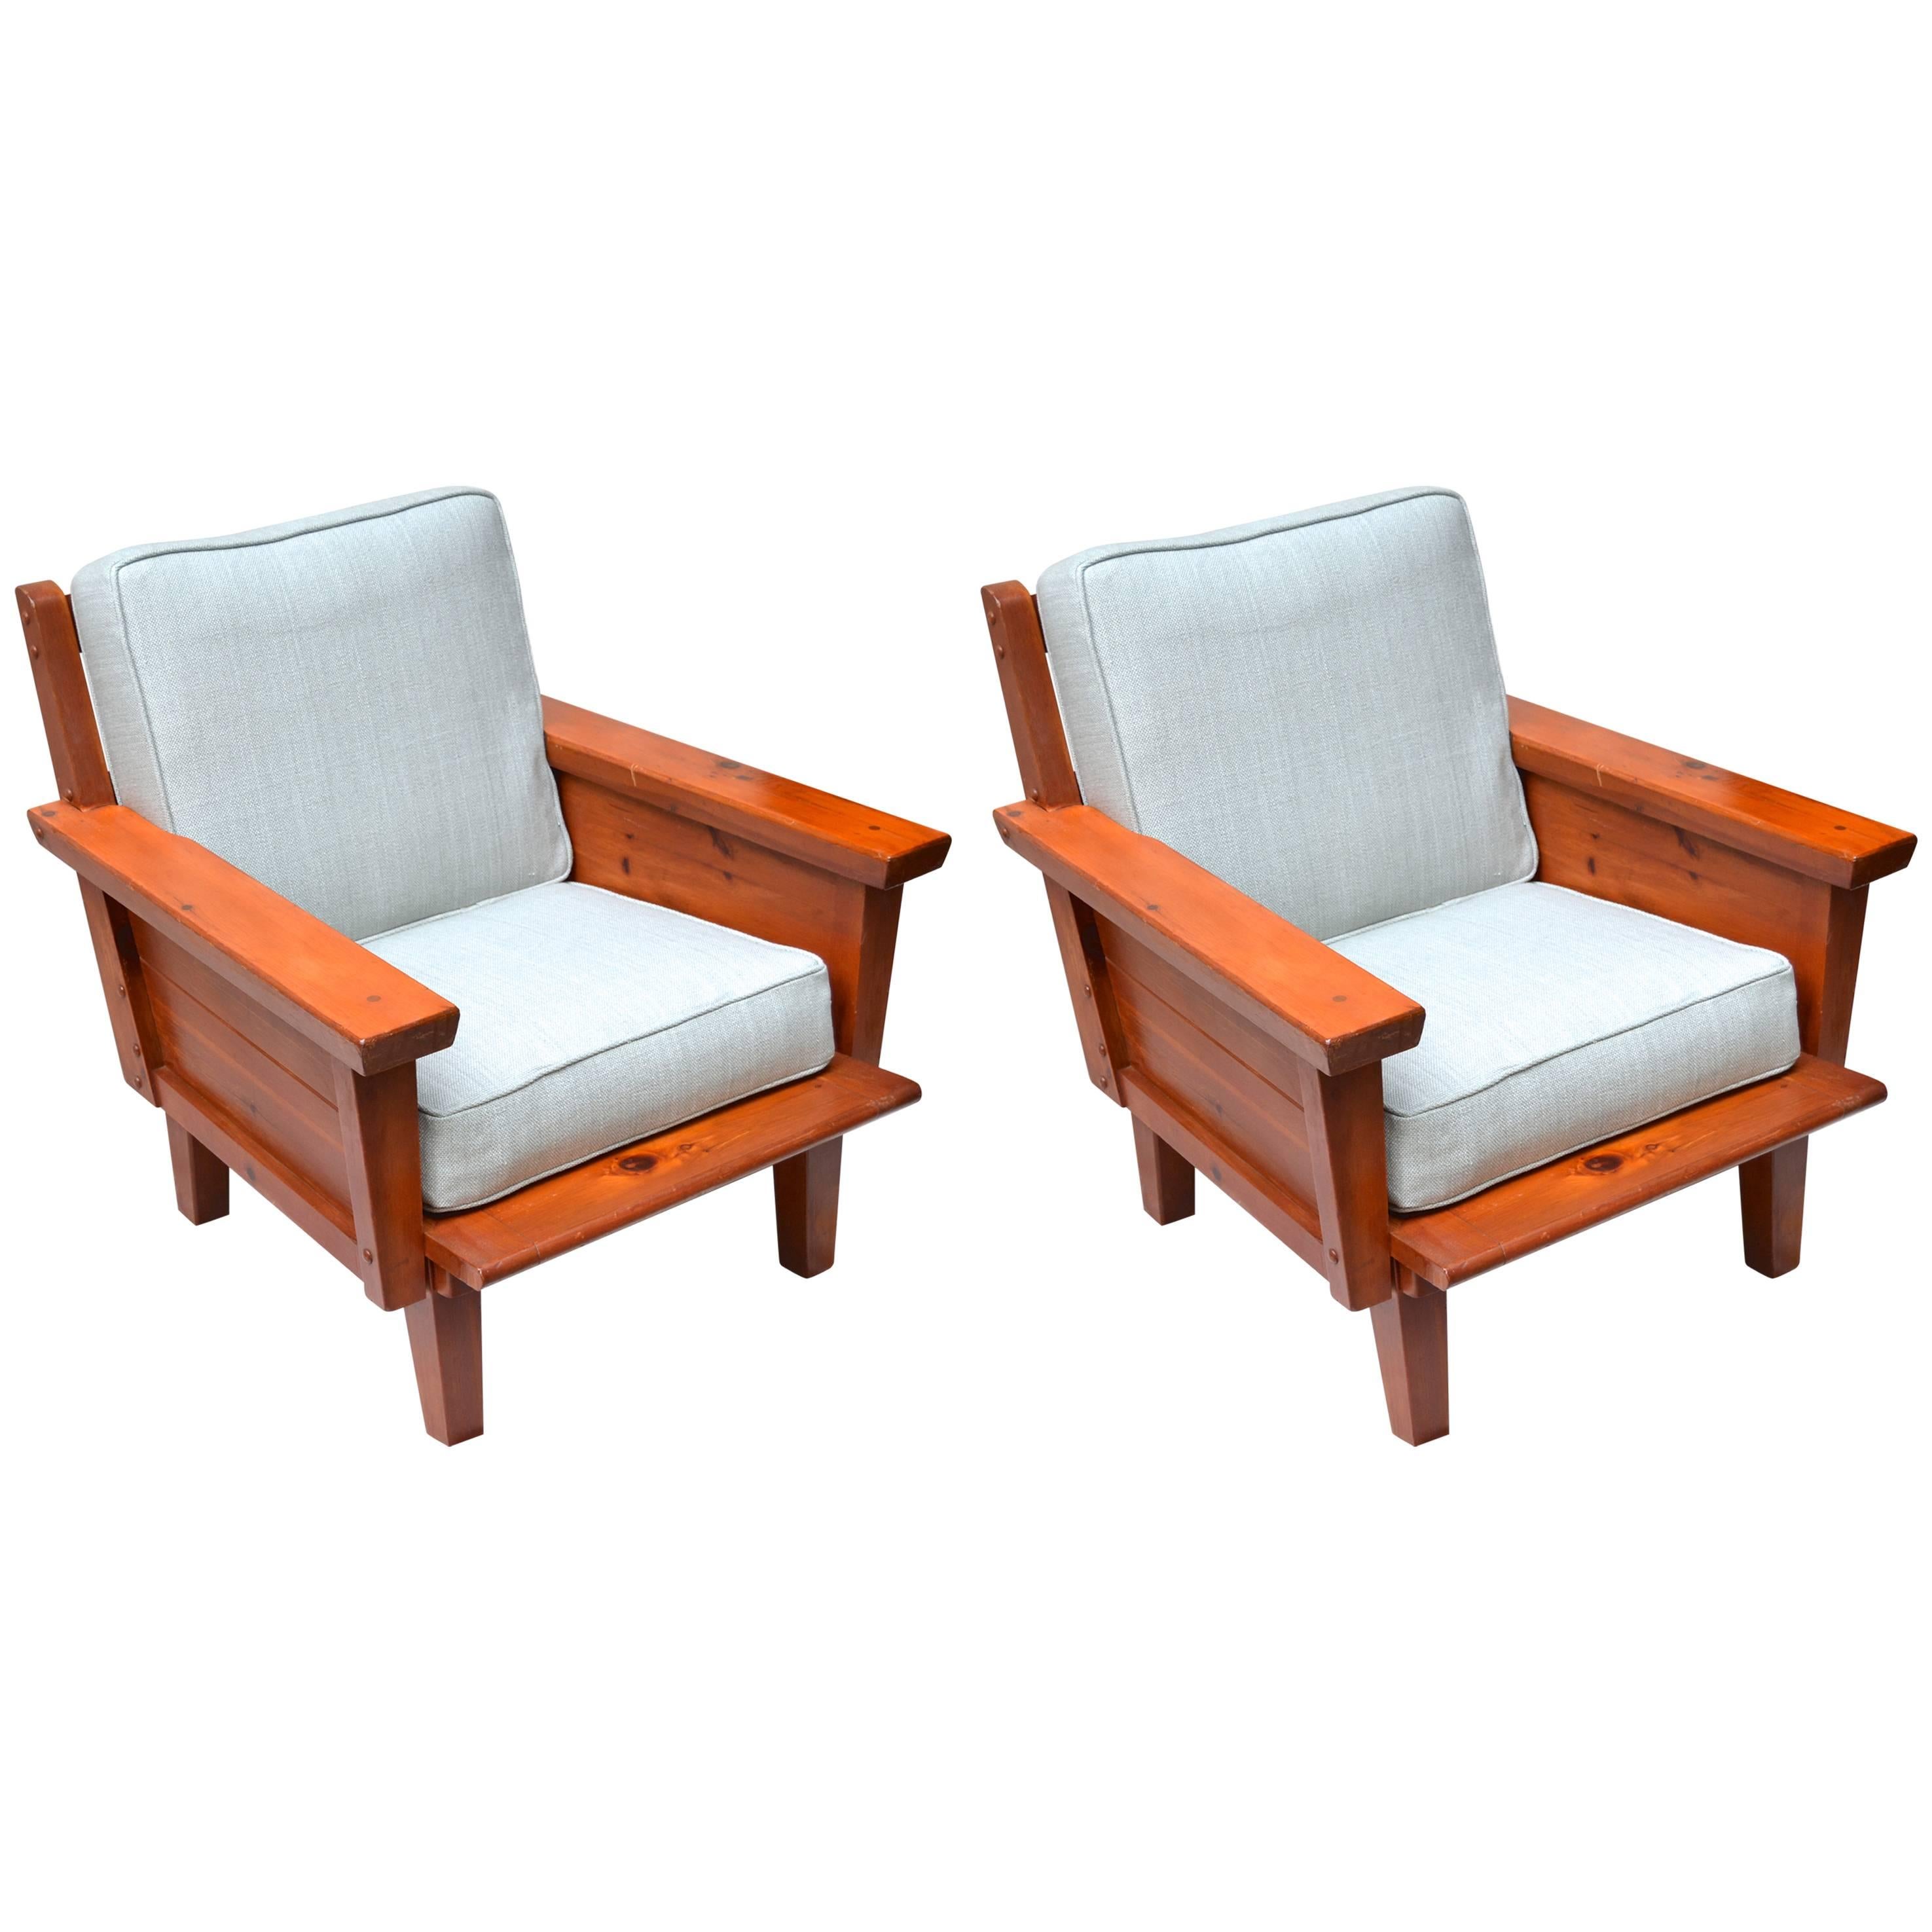 Rustic 1940s Habitant Knotty Pine Club Chairs For Sale